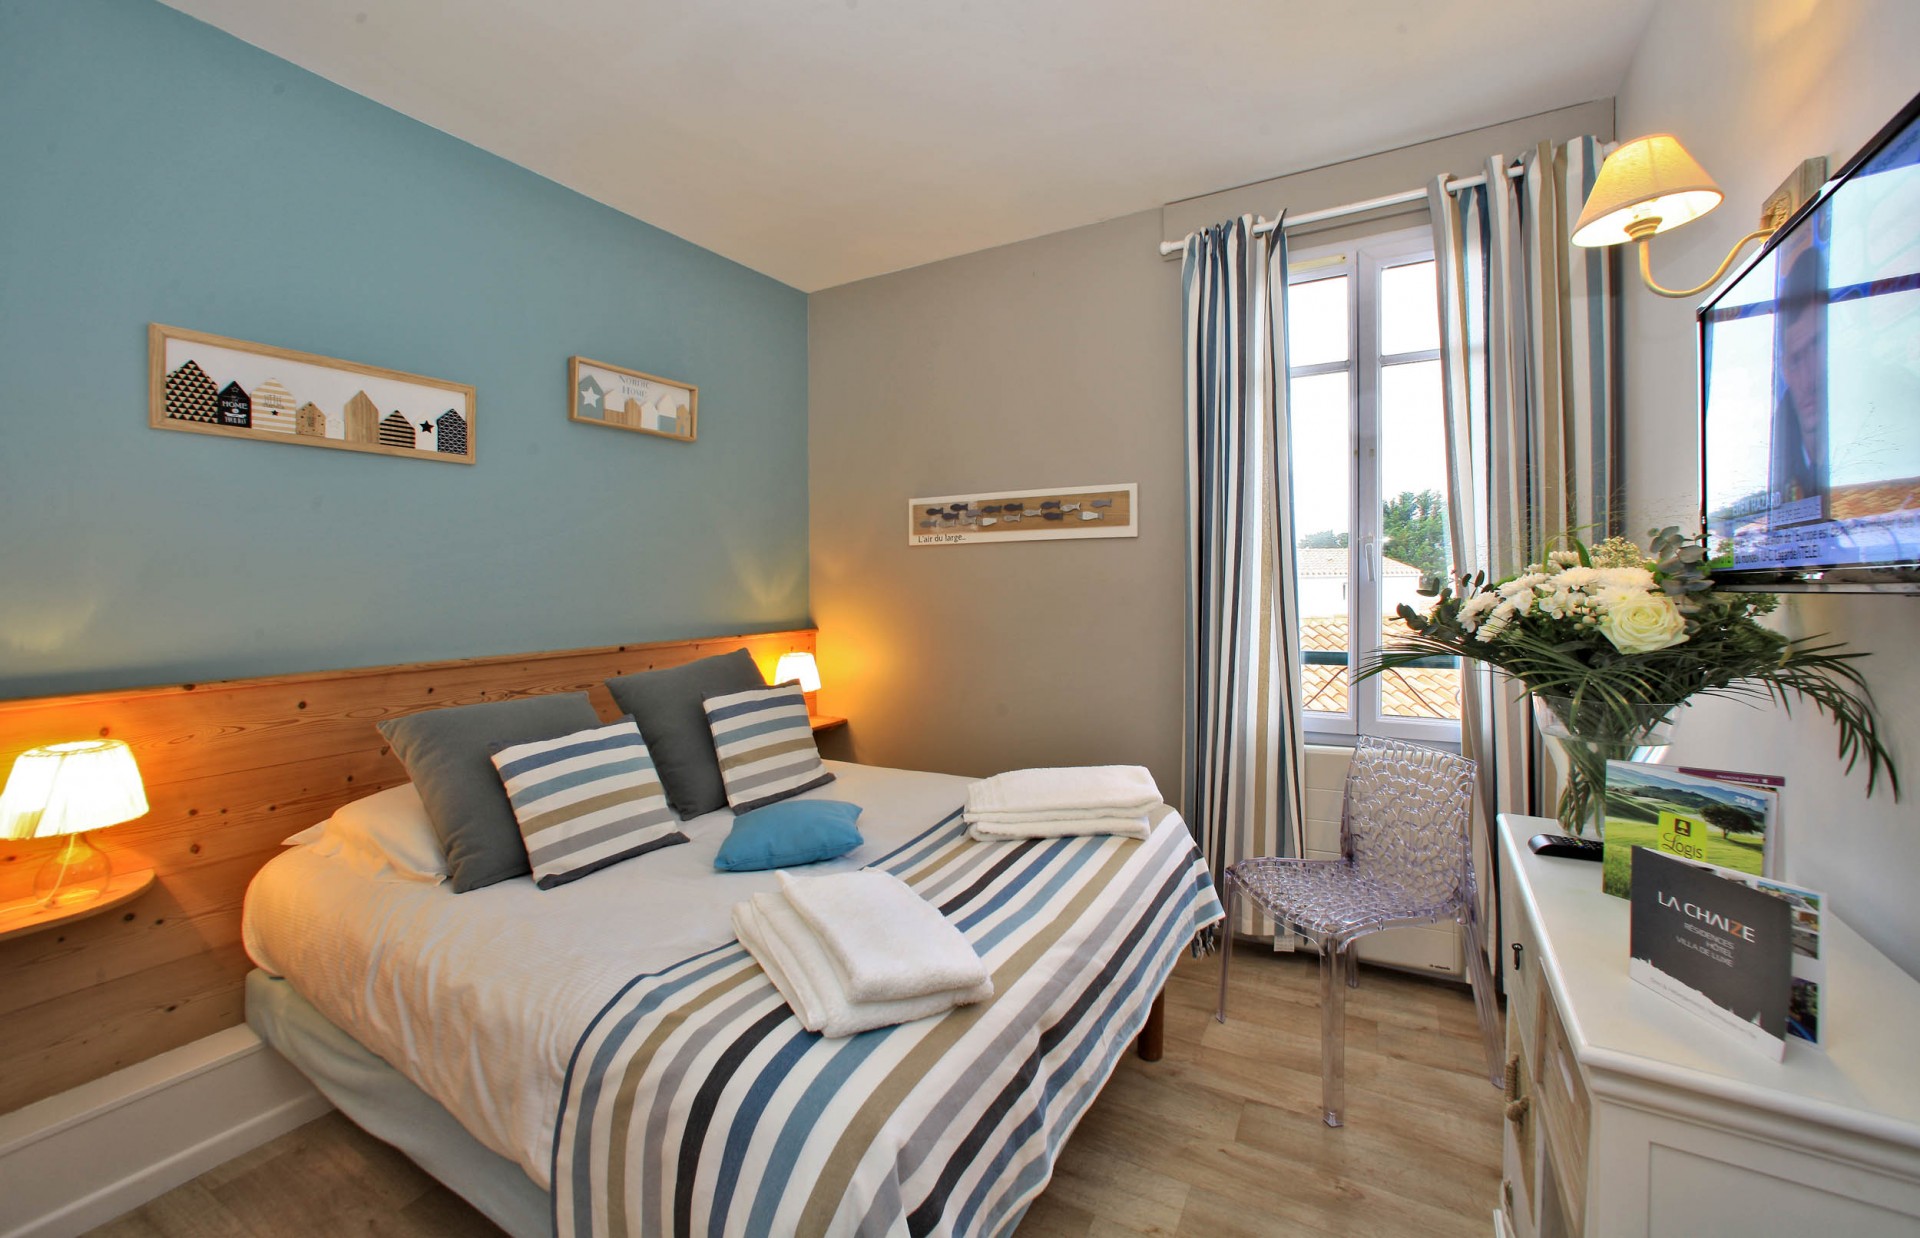 DOUBLE ROOM-2 persons